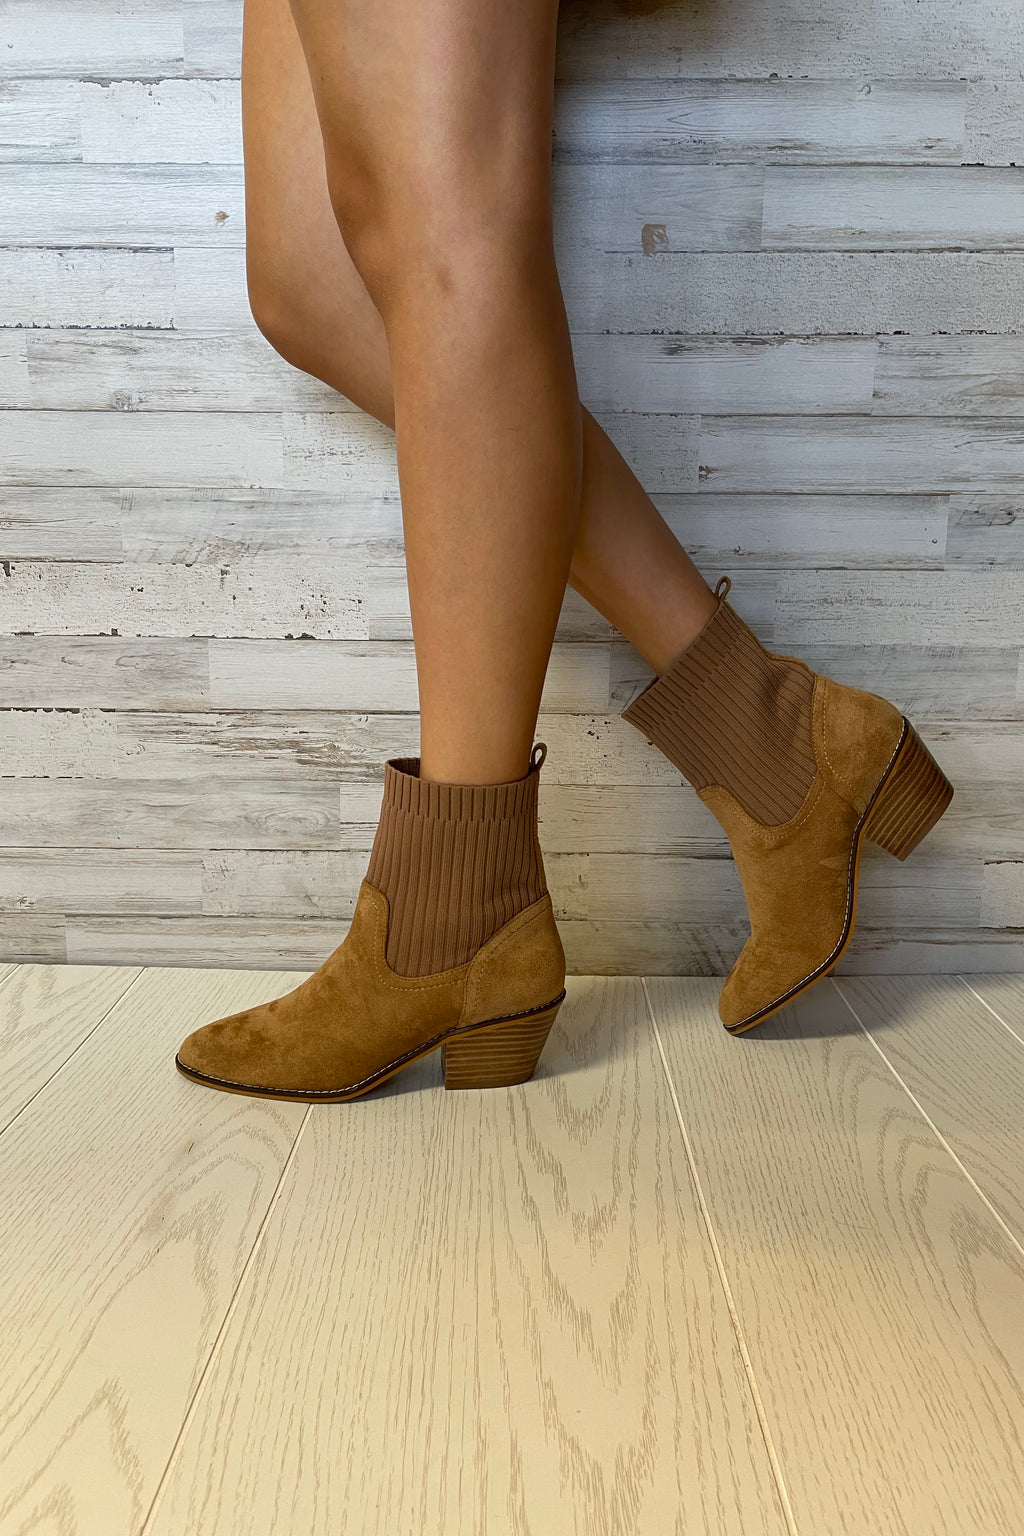 Crackling Stretch Ankle Booties